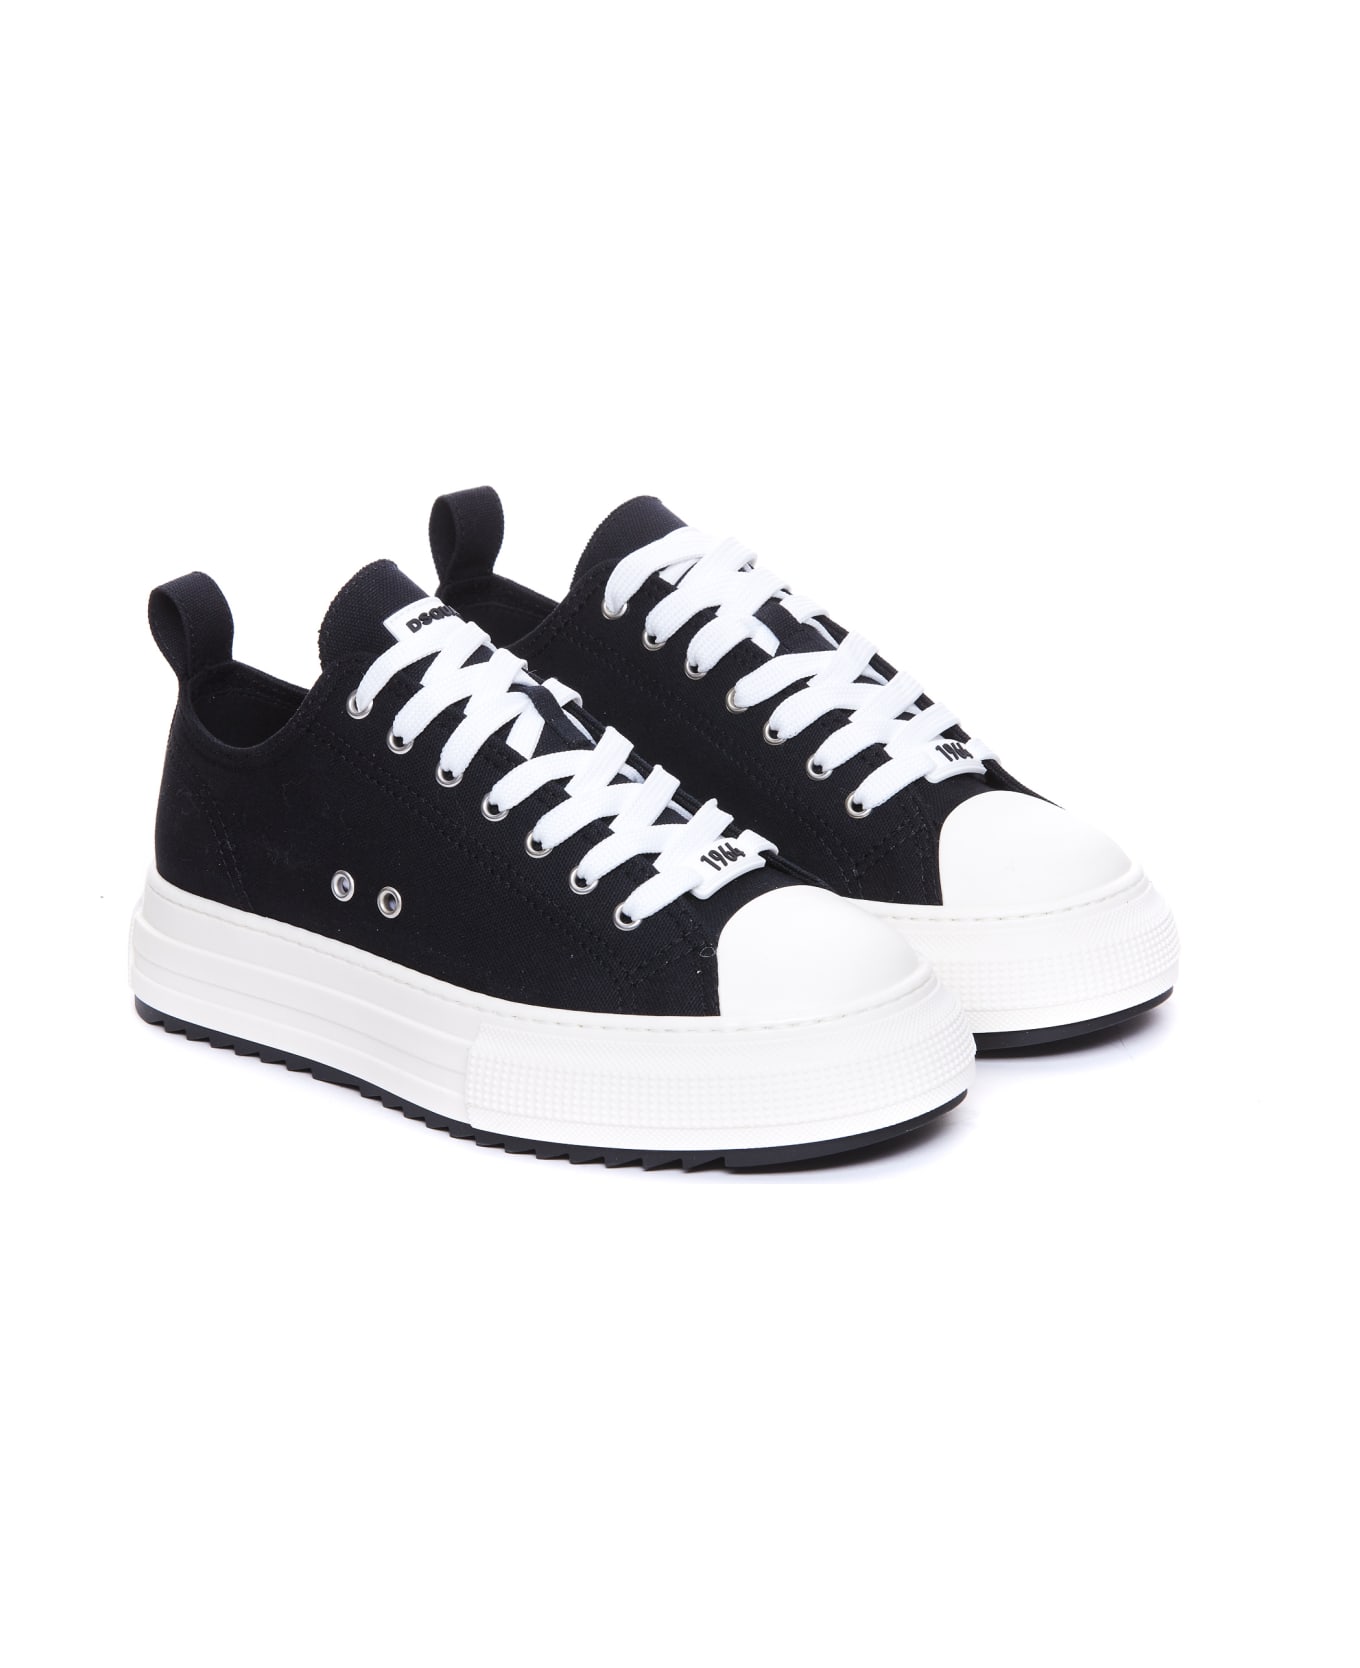 Dsquared2 Berlin Lace-up Low Top Sneakers - Black スニーカー